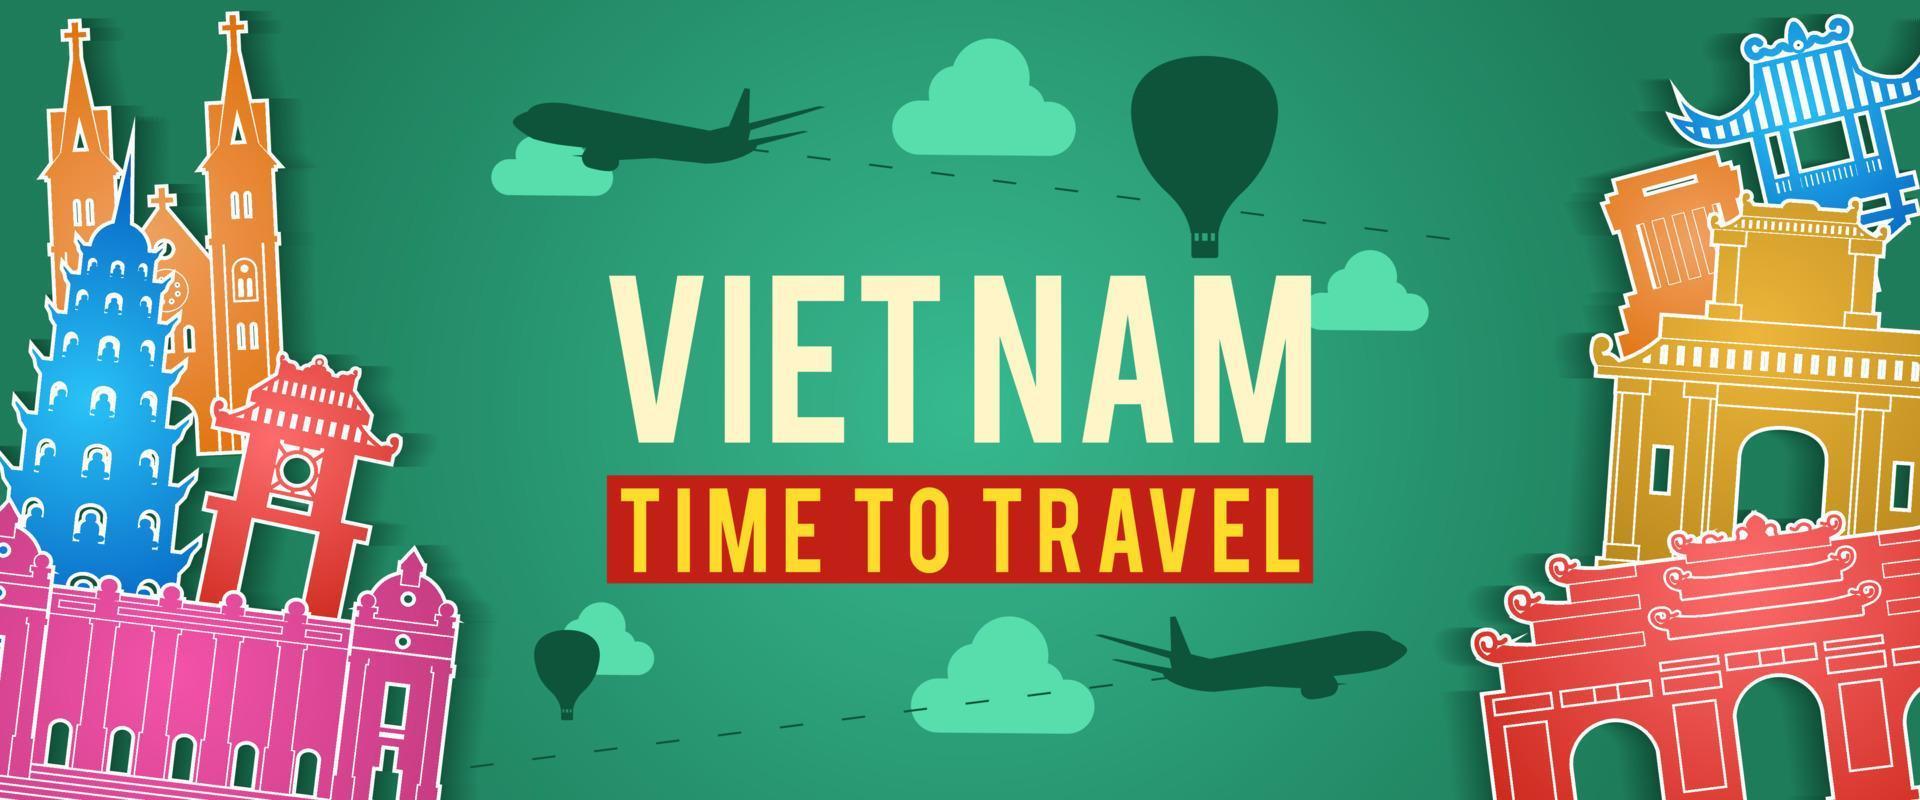 green banner of Vietnam famous landmark silhouette colorful style vector